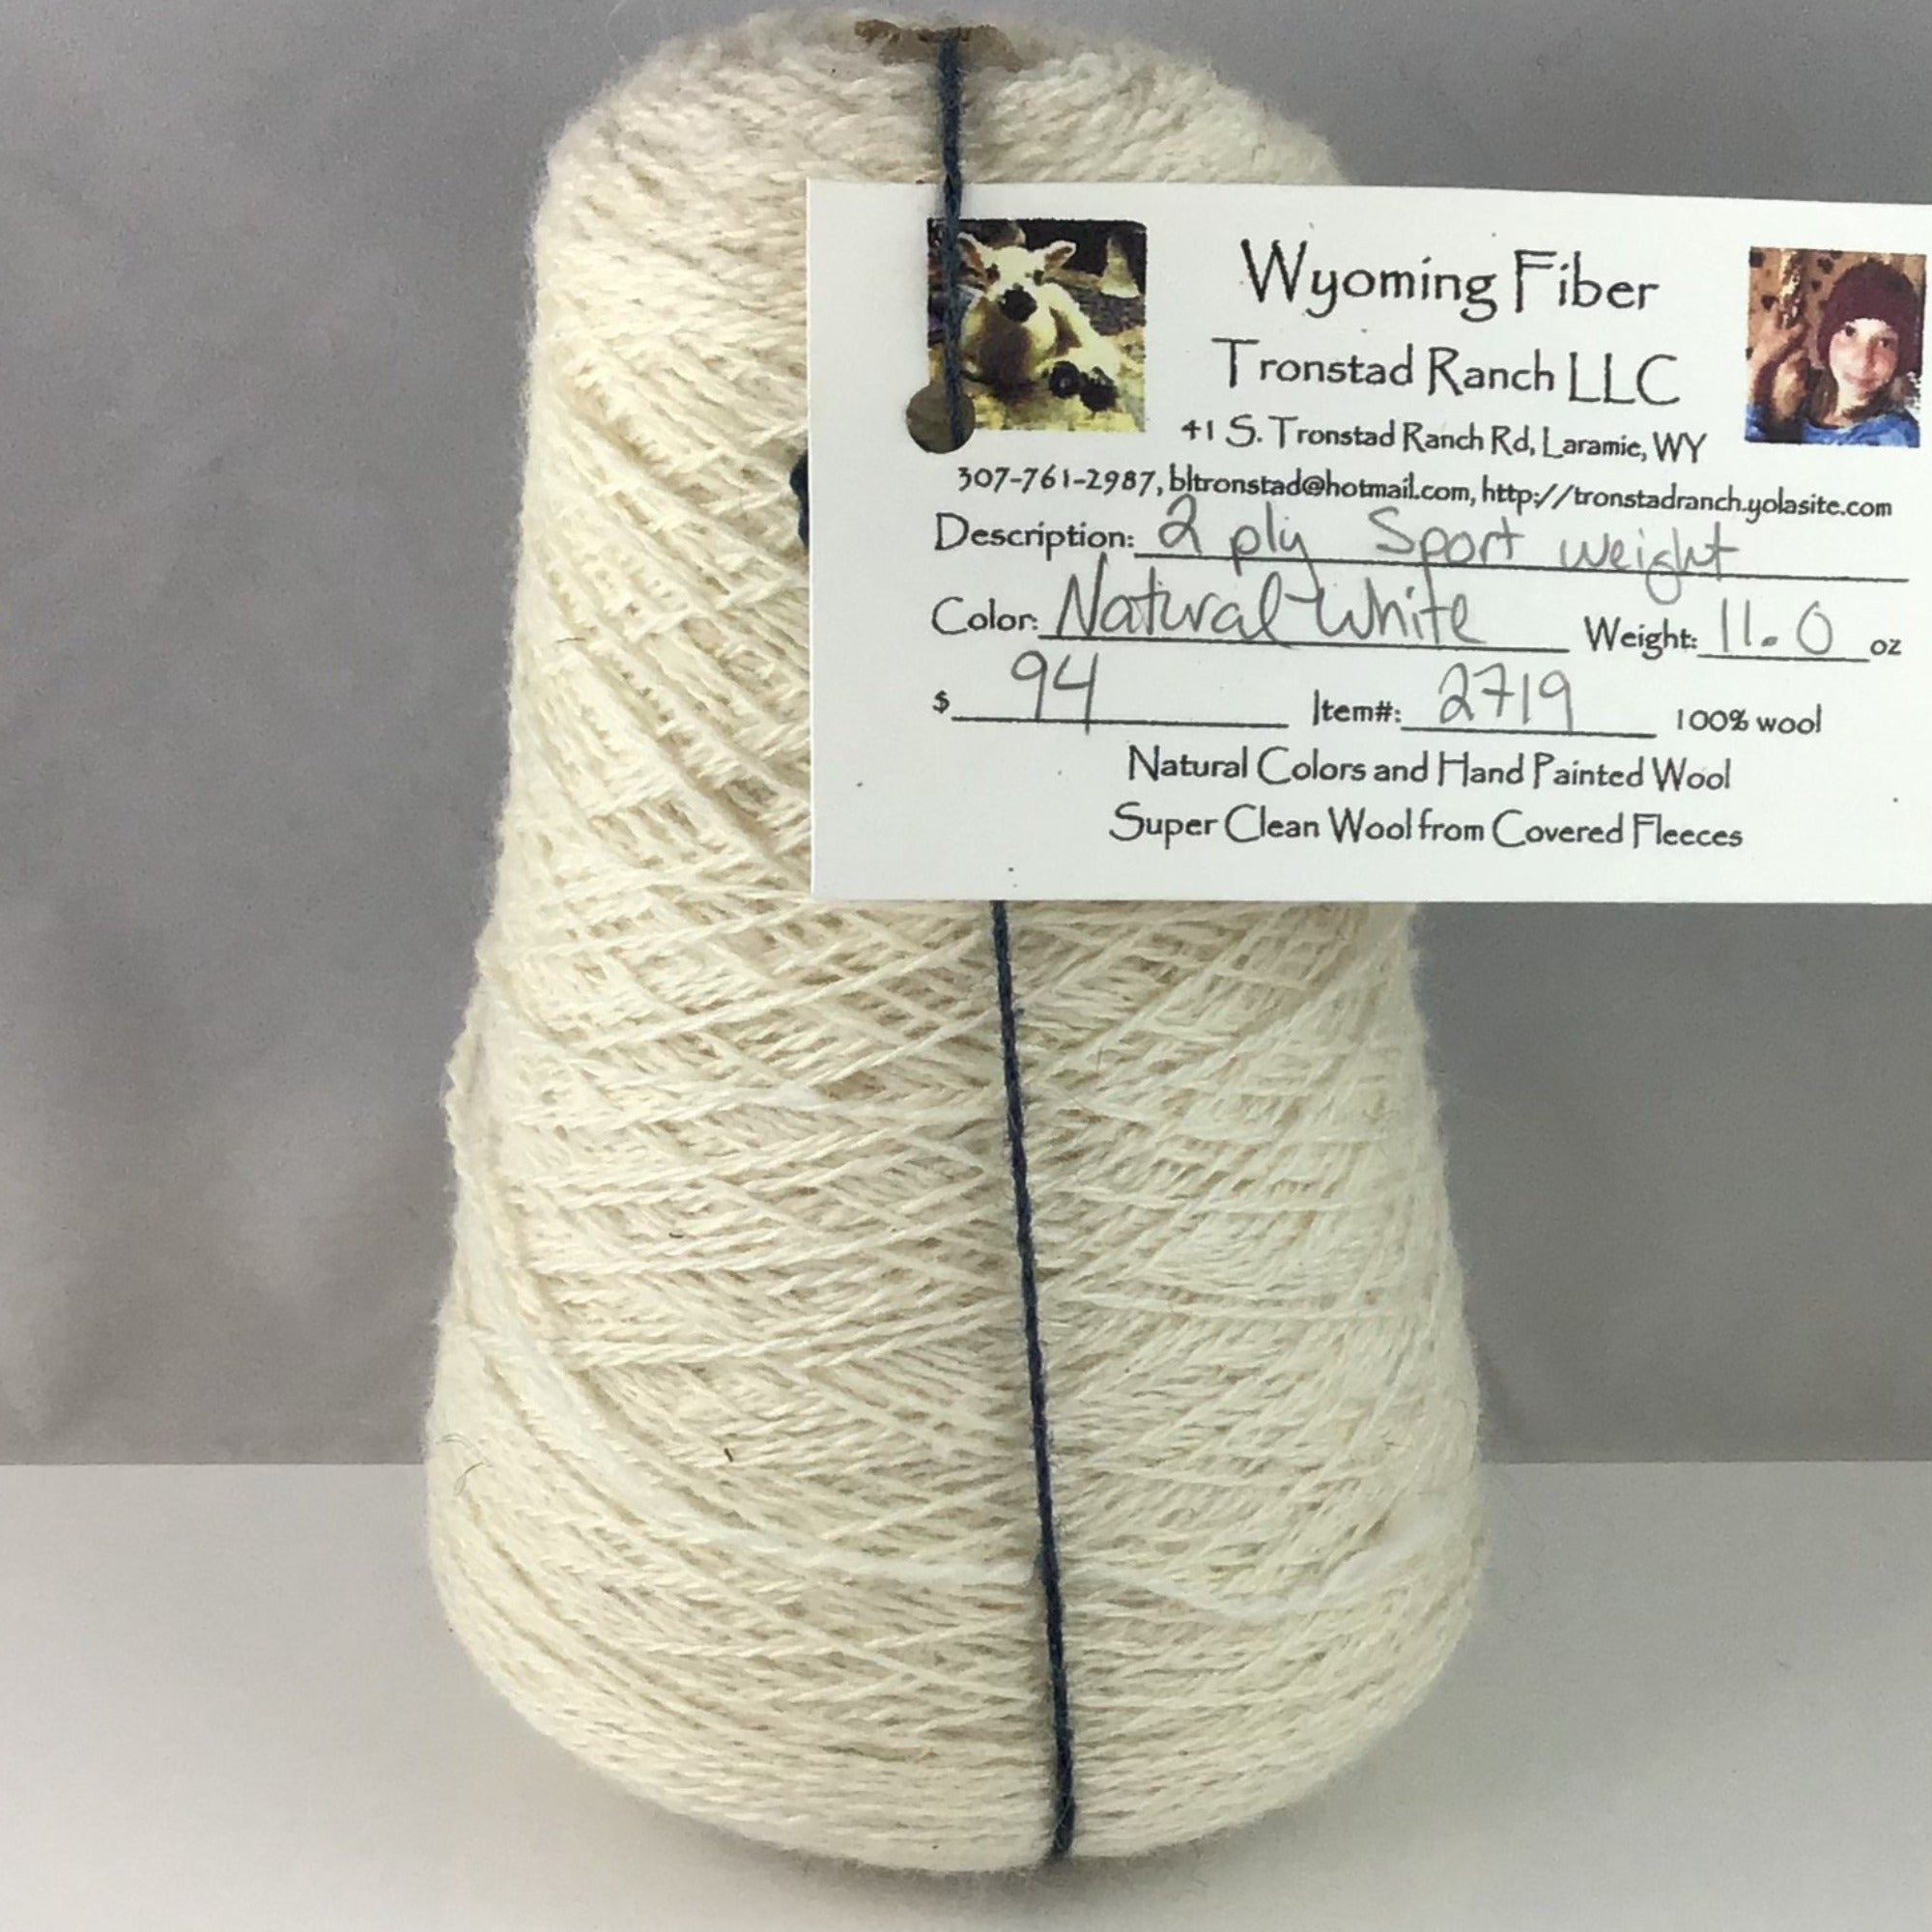 Traditional Collection - 2 Ply Worsted Weight